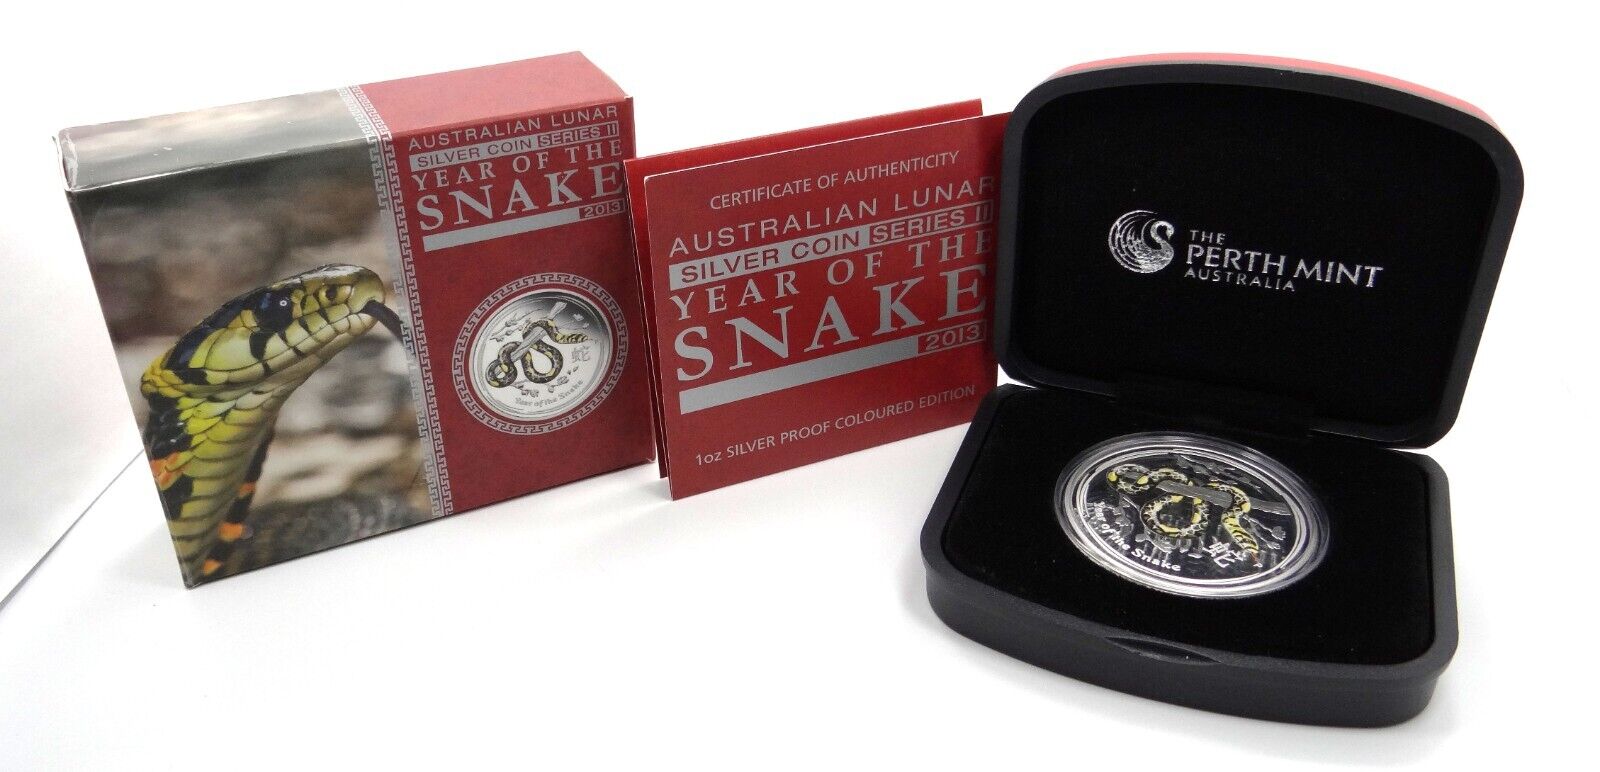 1 Oz Silver Coin 2013 $0.50 Australian Lunar Series II Year of The Snake Color-classypw.com-3